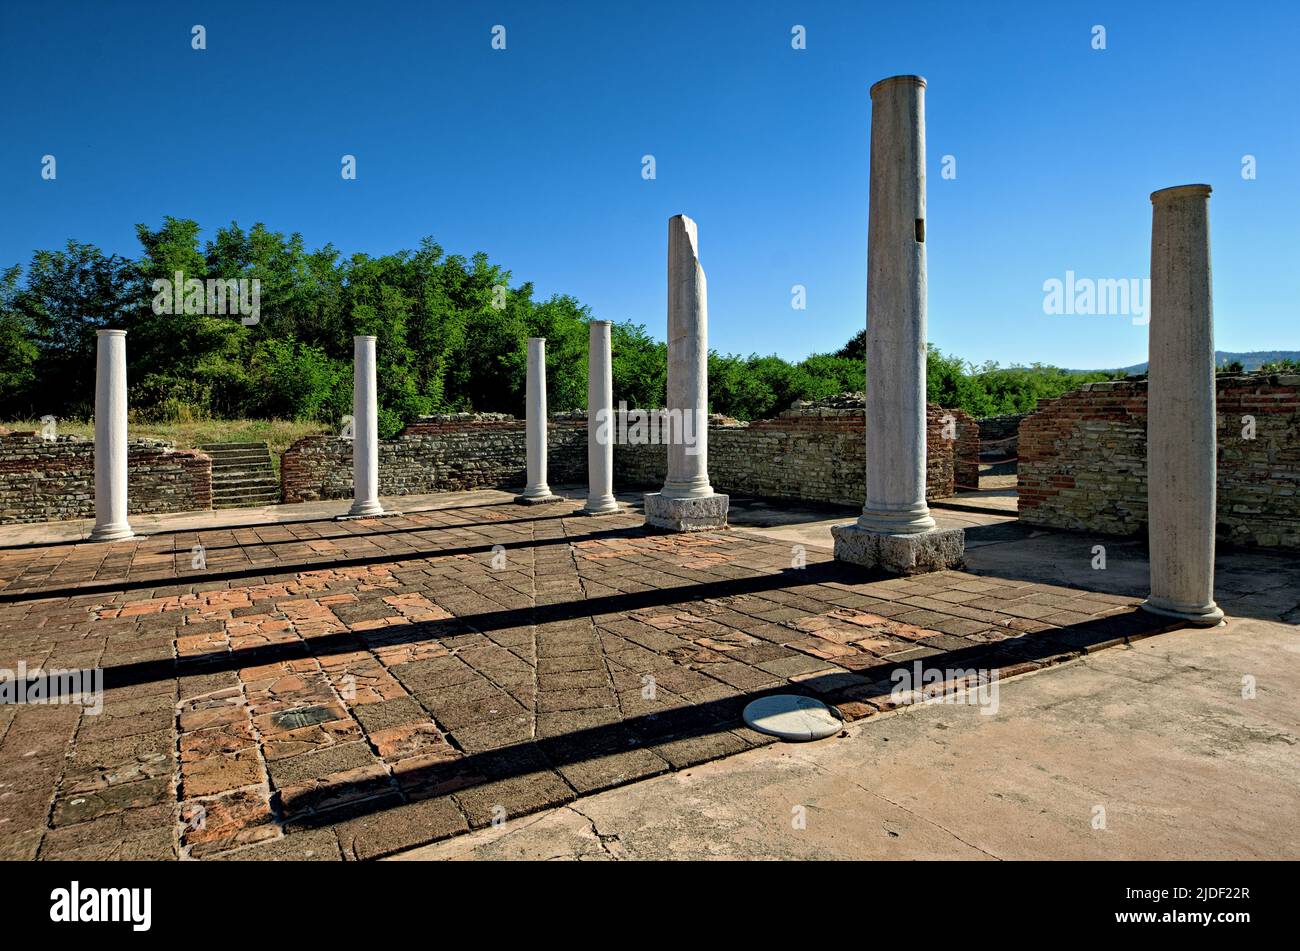 colums of peristyle in the archaeological dig of Gamzigrad, the ancient Felix Romuliana built by Galerius Emperor of Roman Empire in Serbia Stock Photo